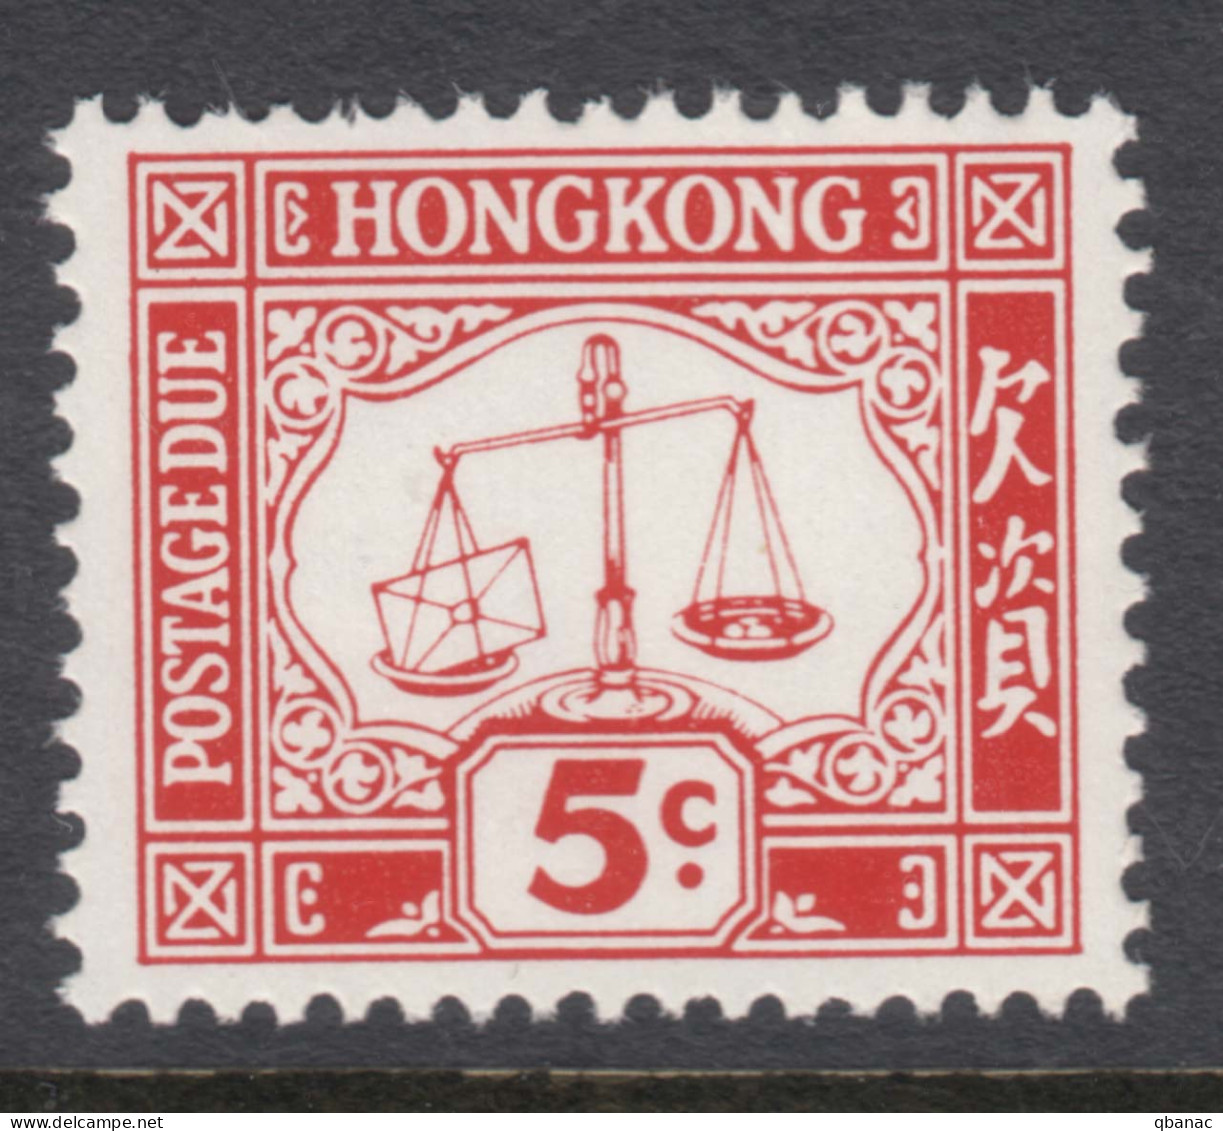 Hong Kong 1974 Postage Due Mi#21 Mint Never Hinged - Unused Stamps